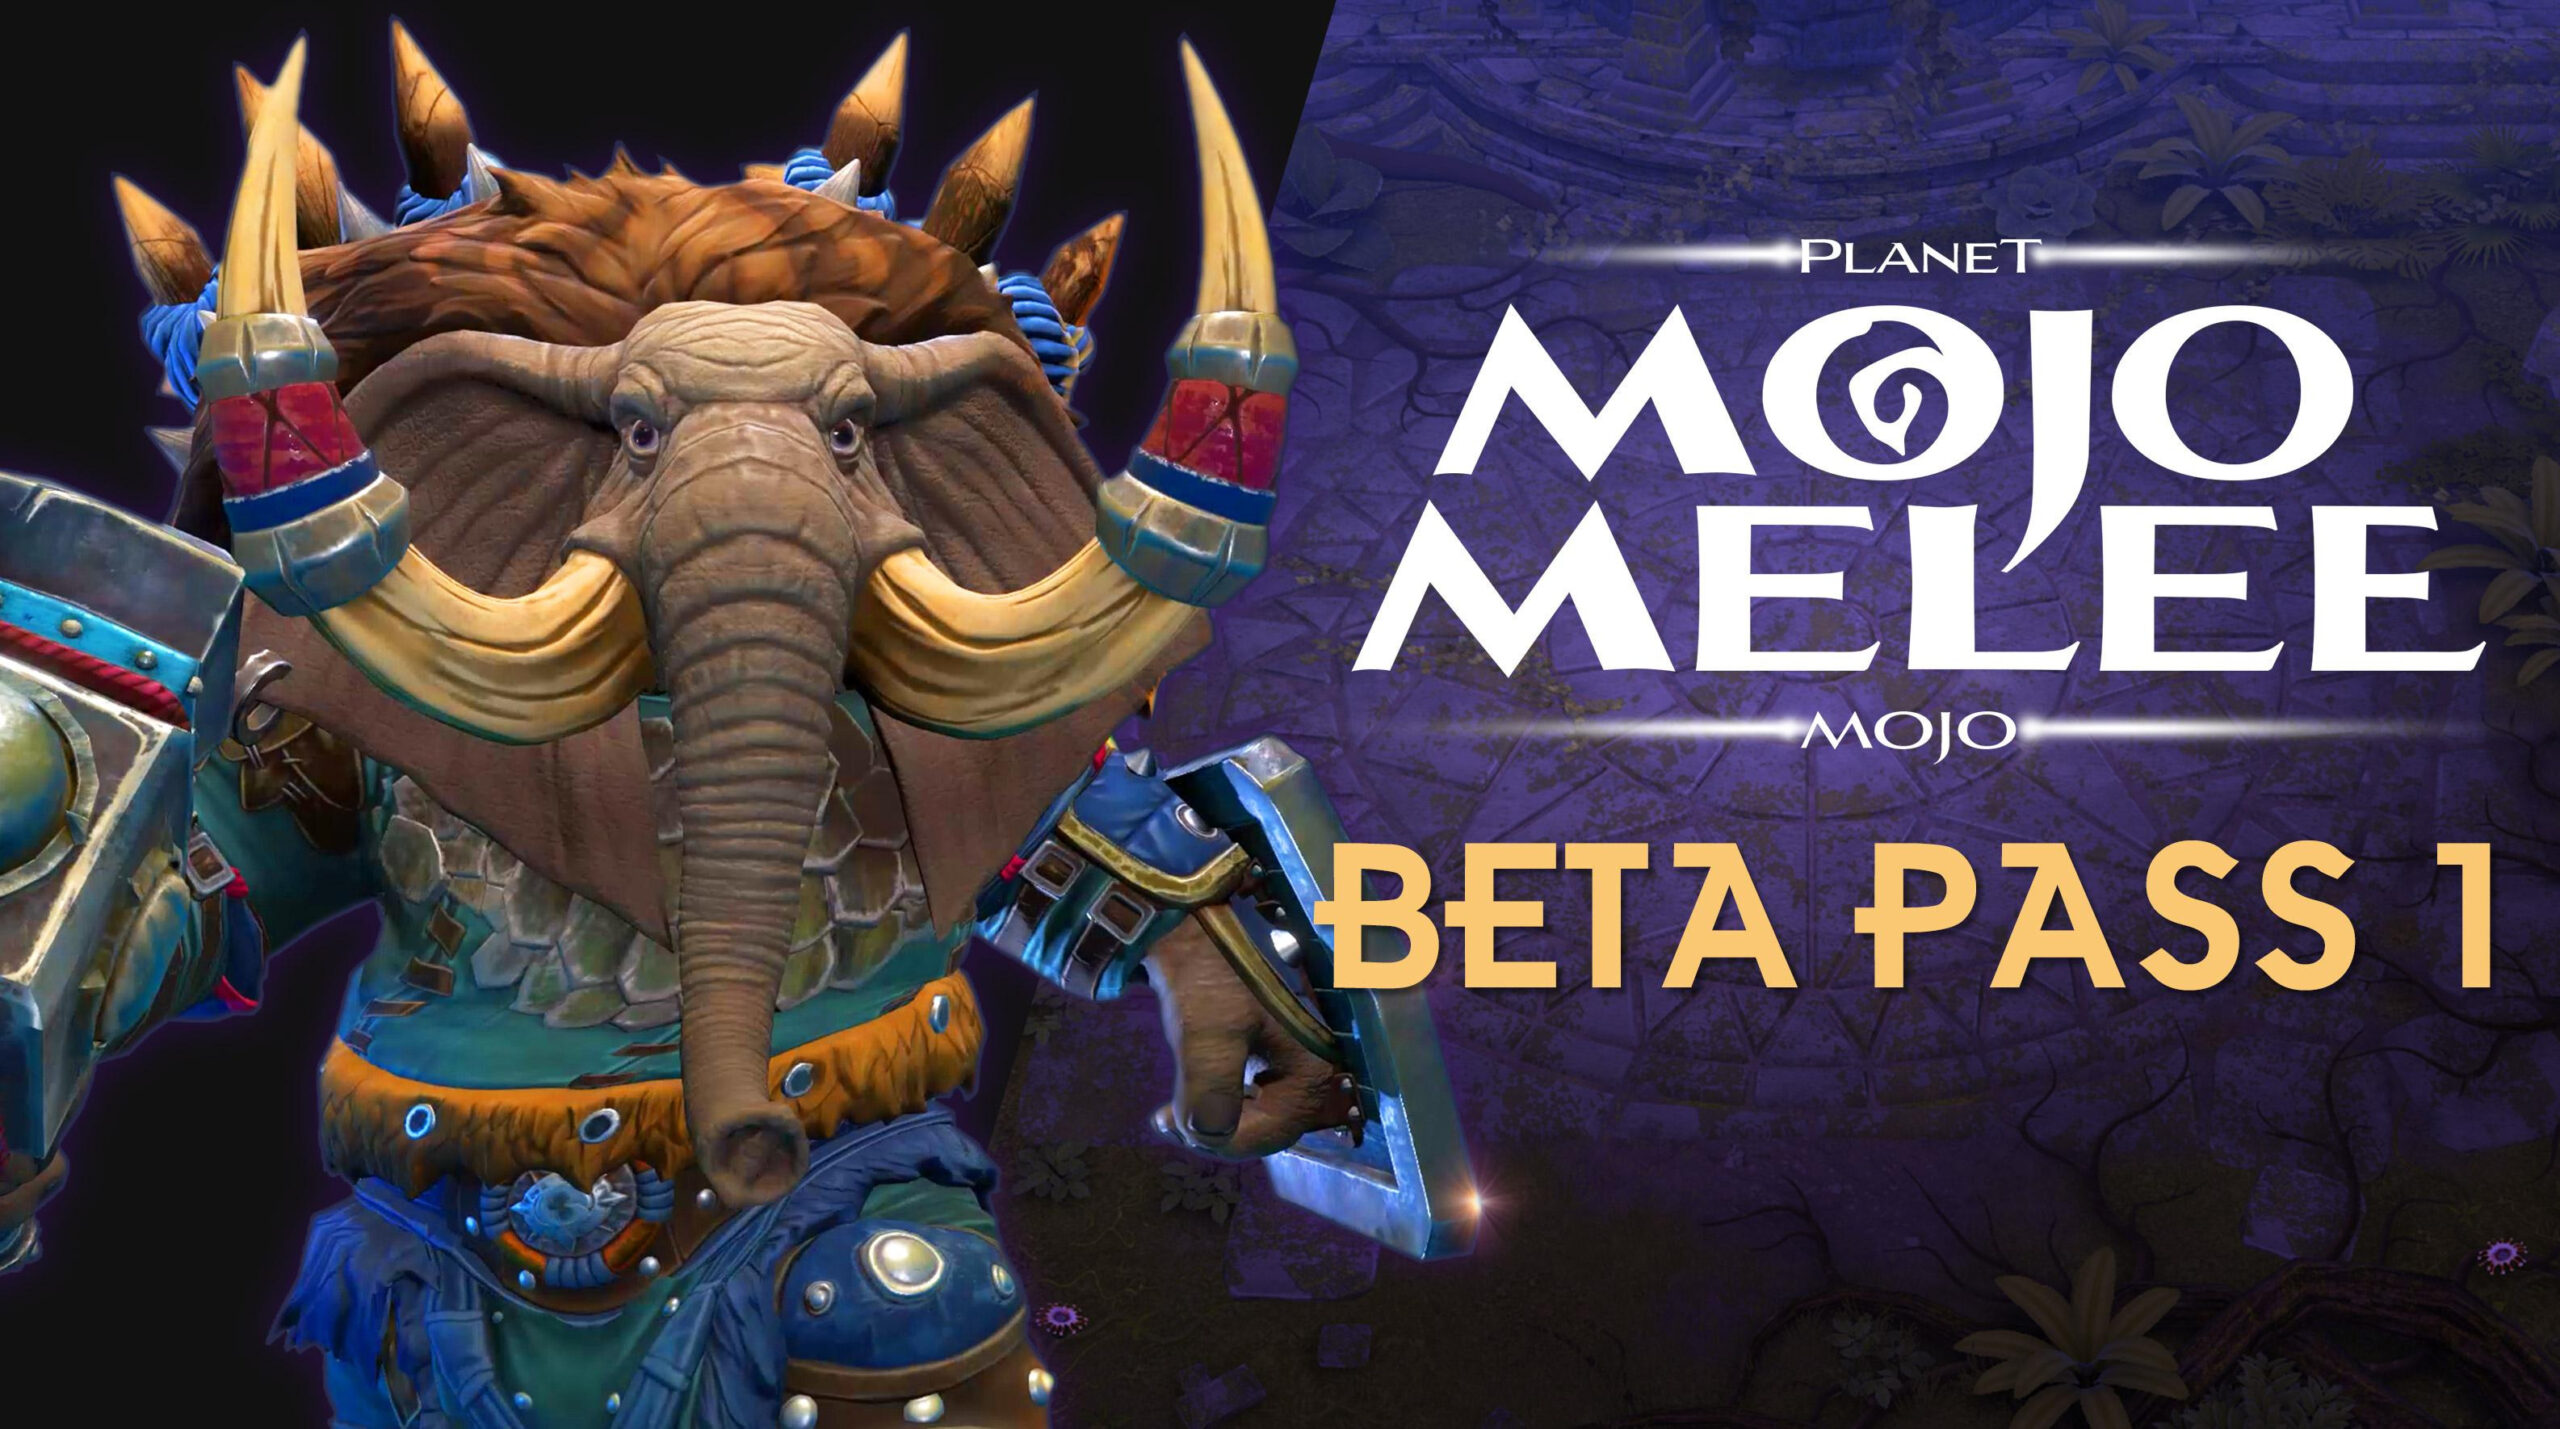 Play and Earn with Mojo Melee Open Beta